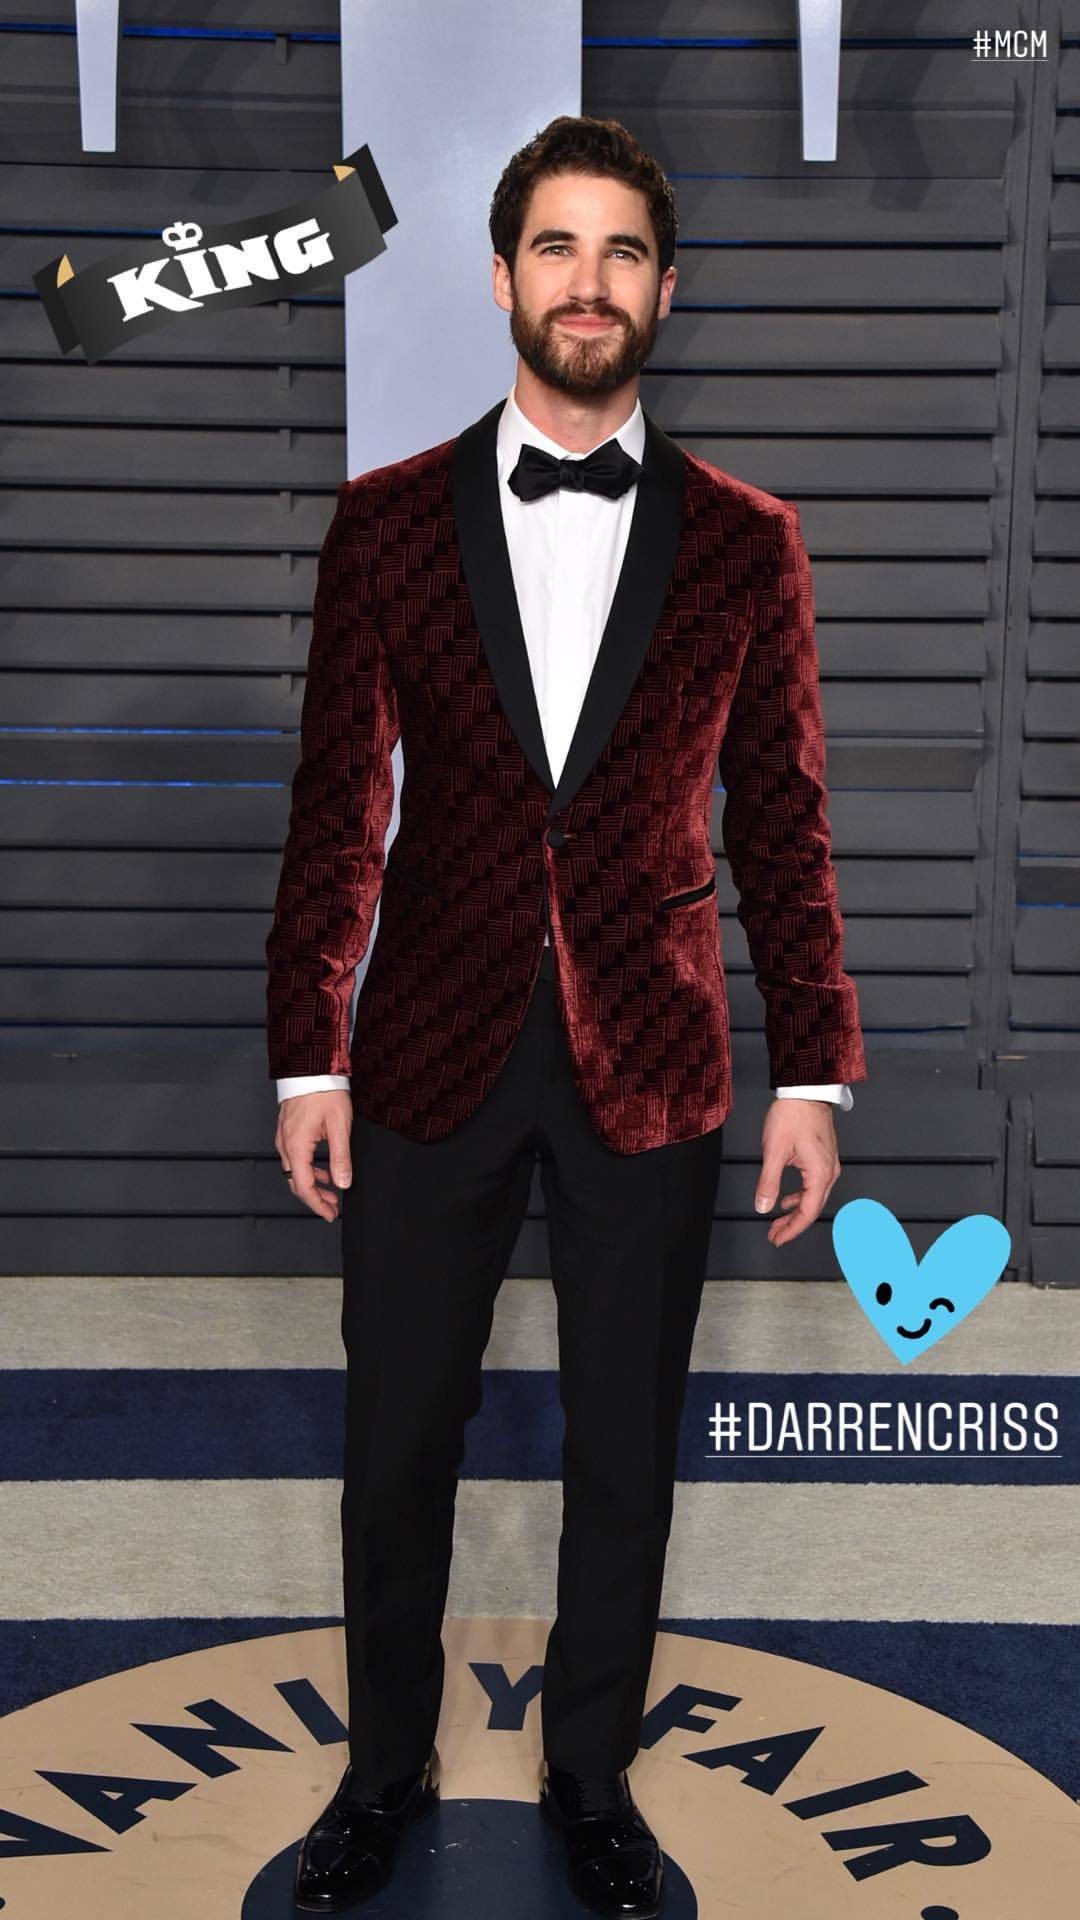 CheersToStephen - Darren's Miscellaneous Projects and Events for 2018 - Page 3 Tumblr_p67xapBh3g1wpi2k2o1_1280